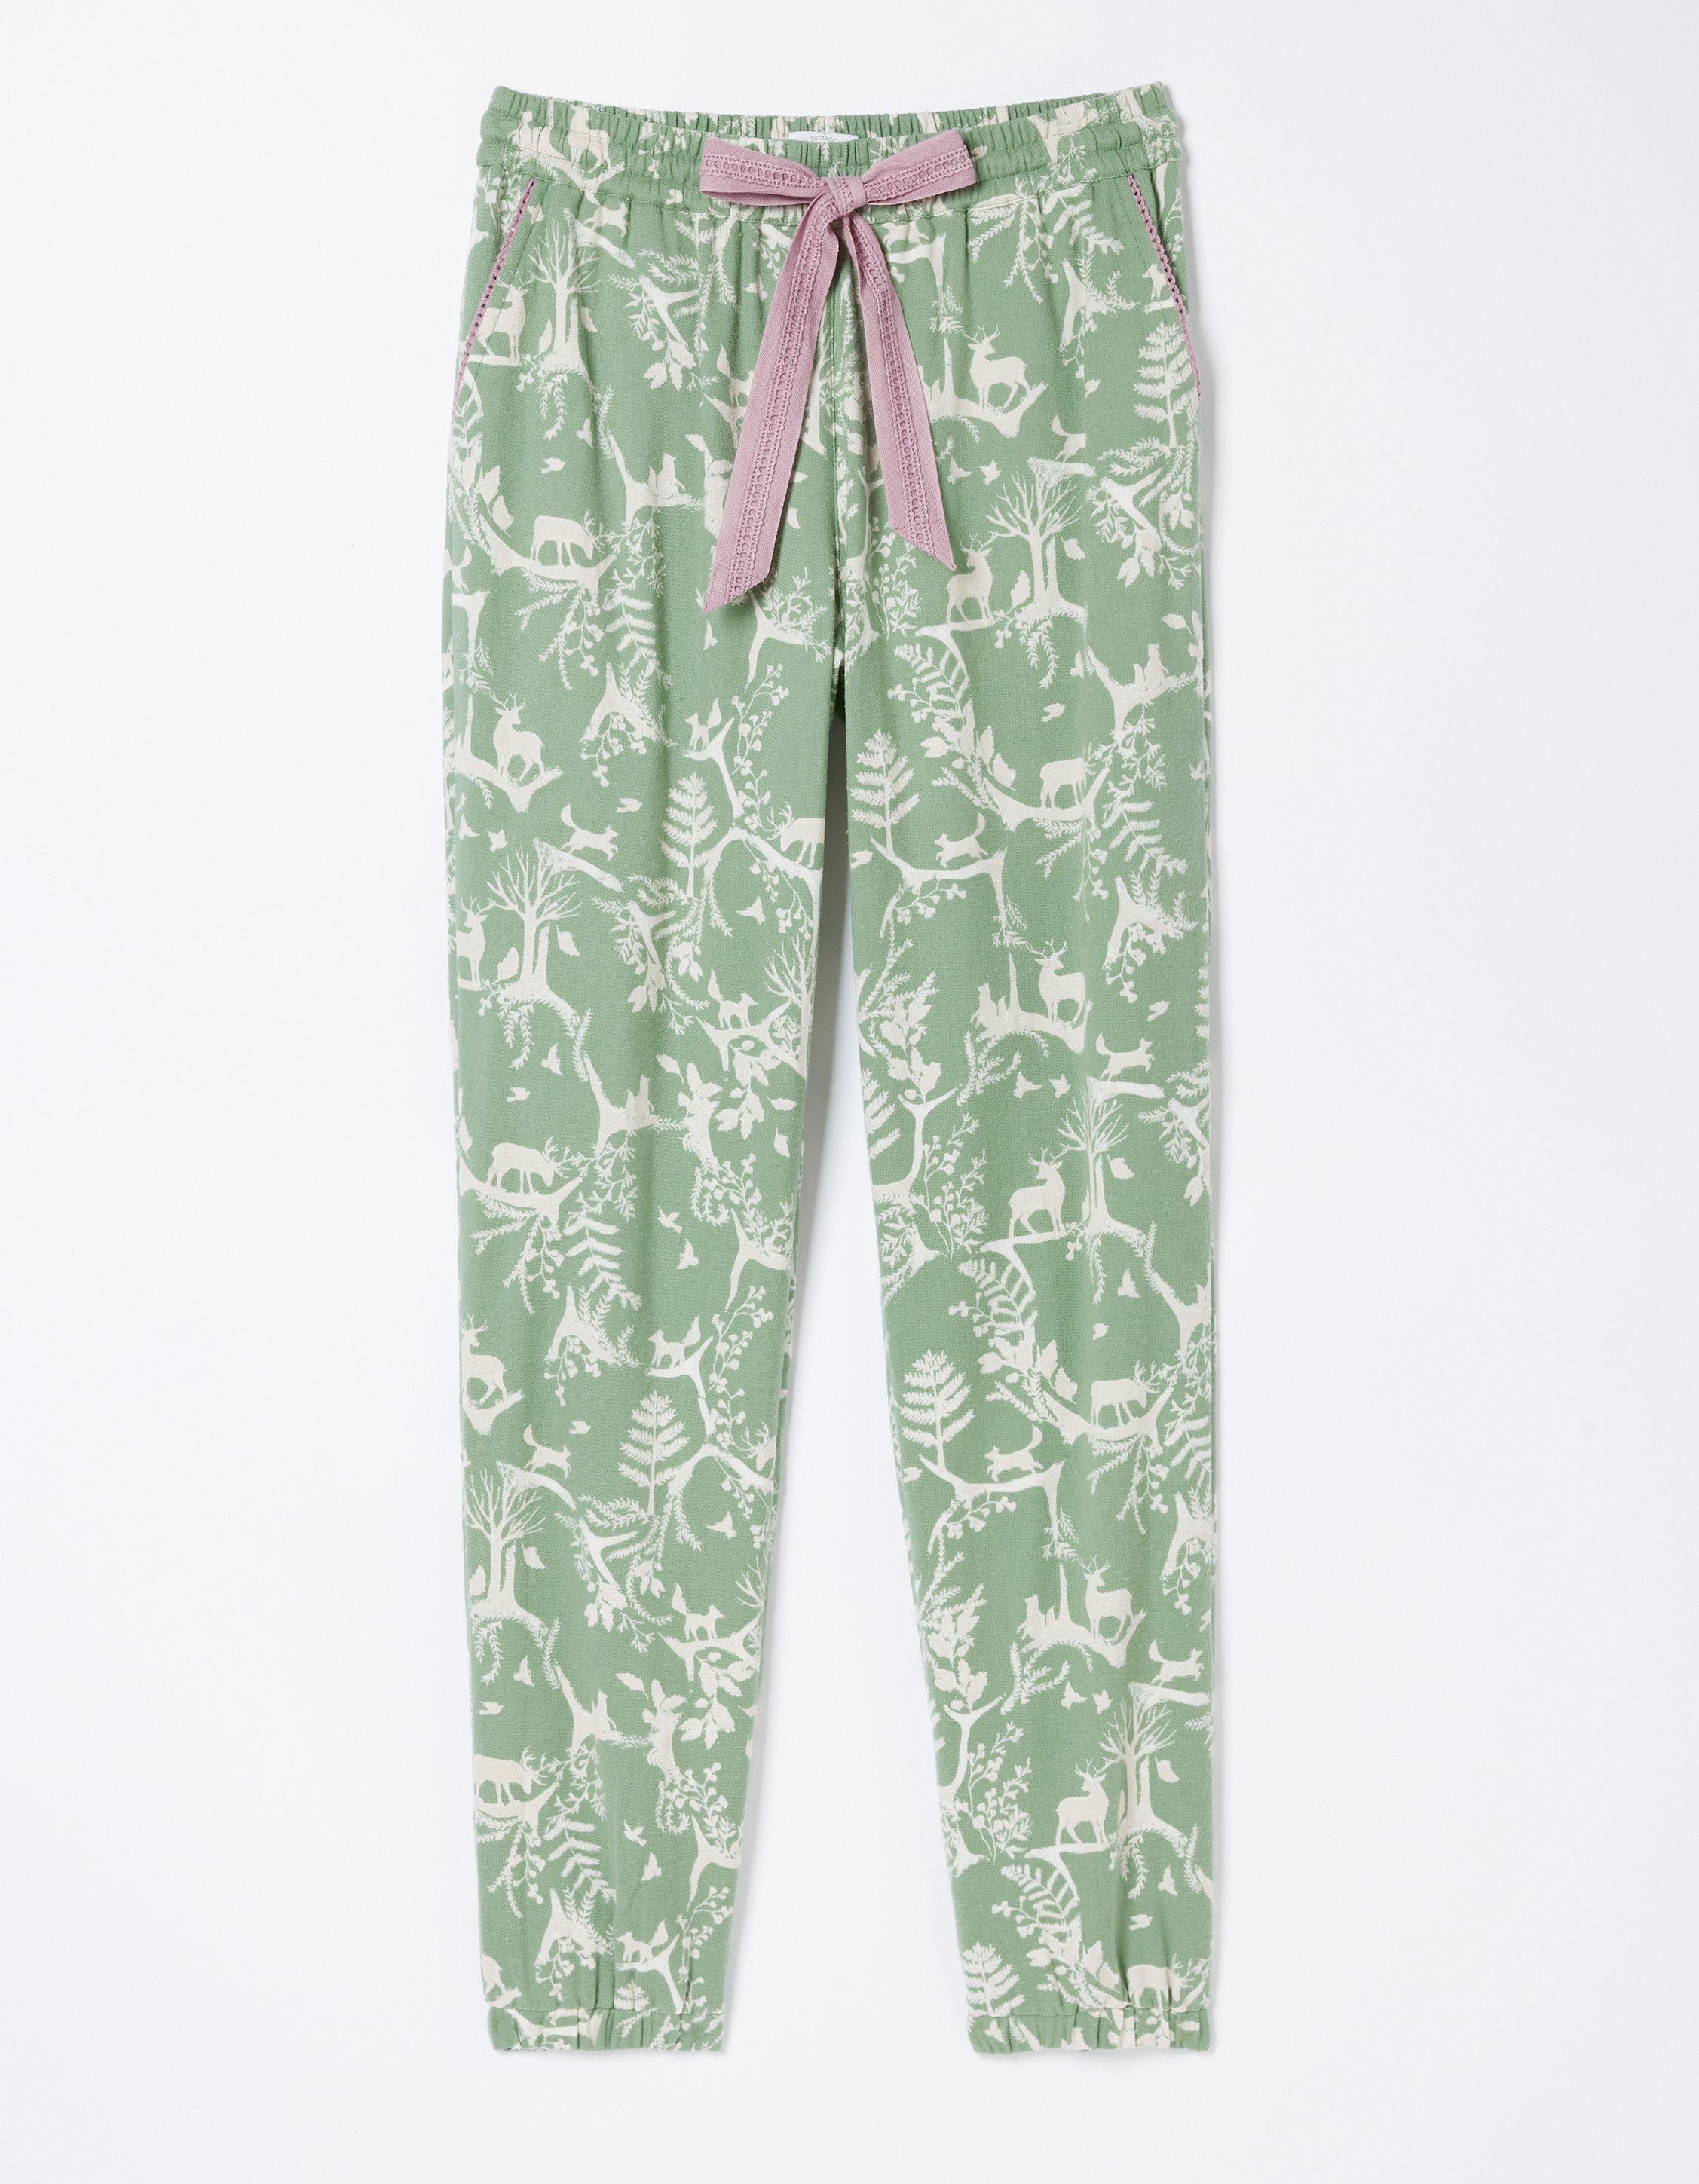 Cora Forest Scapes Lounge Pants, Nightwear & Pajamas